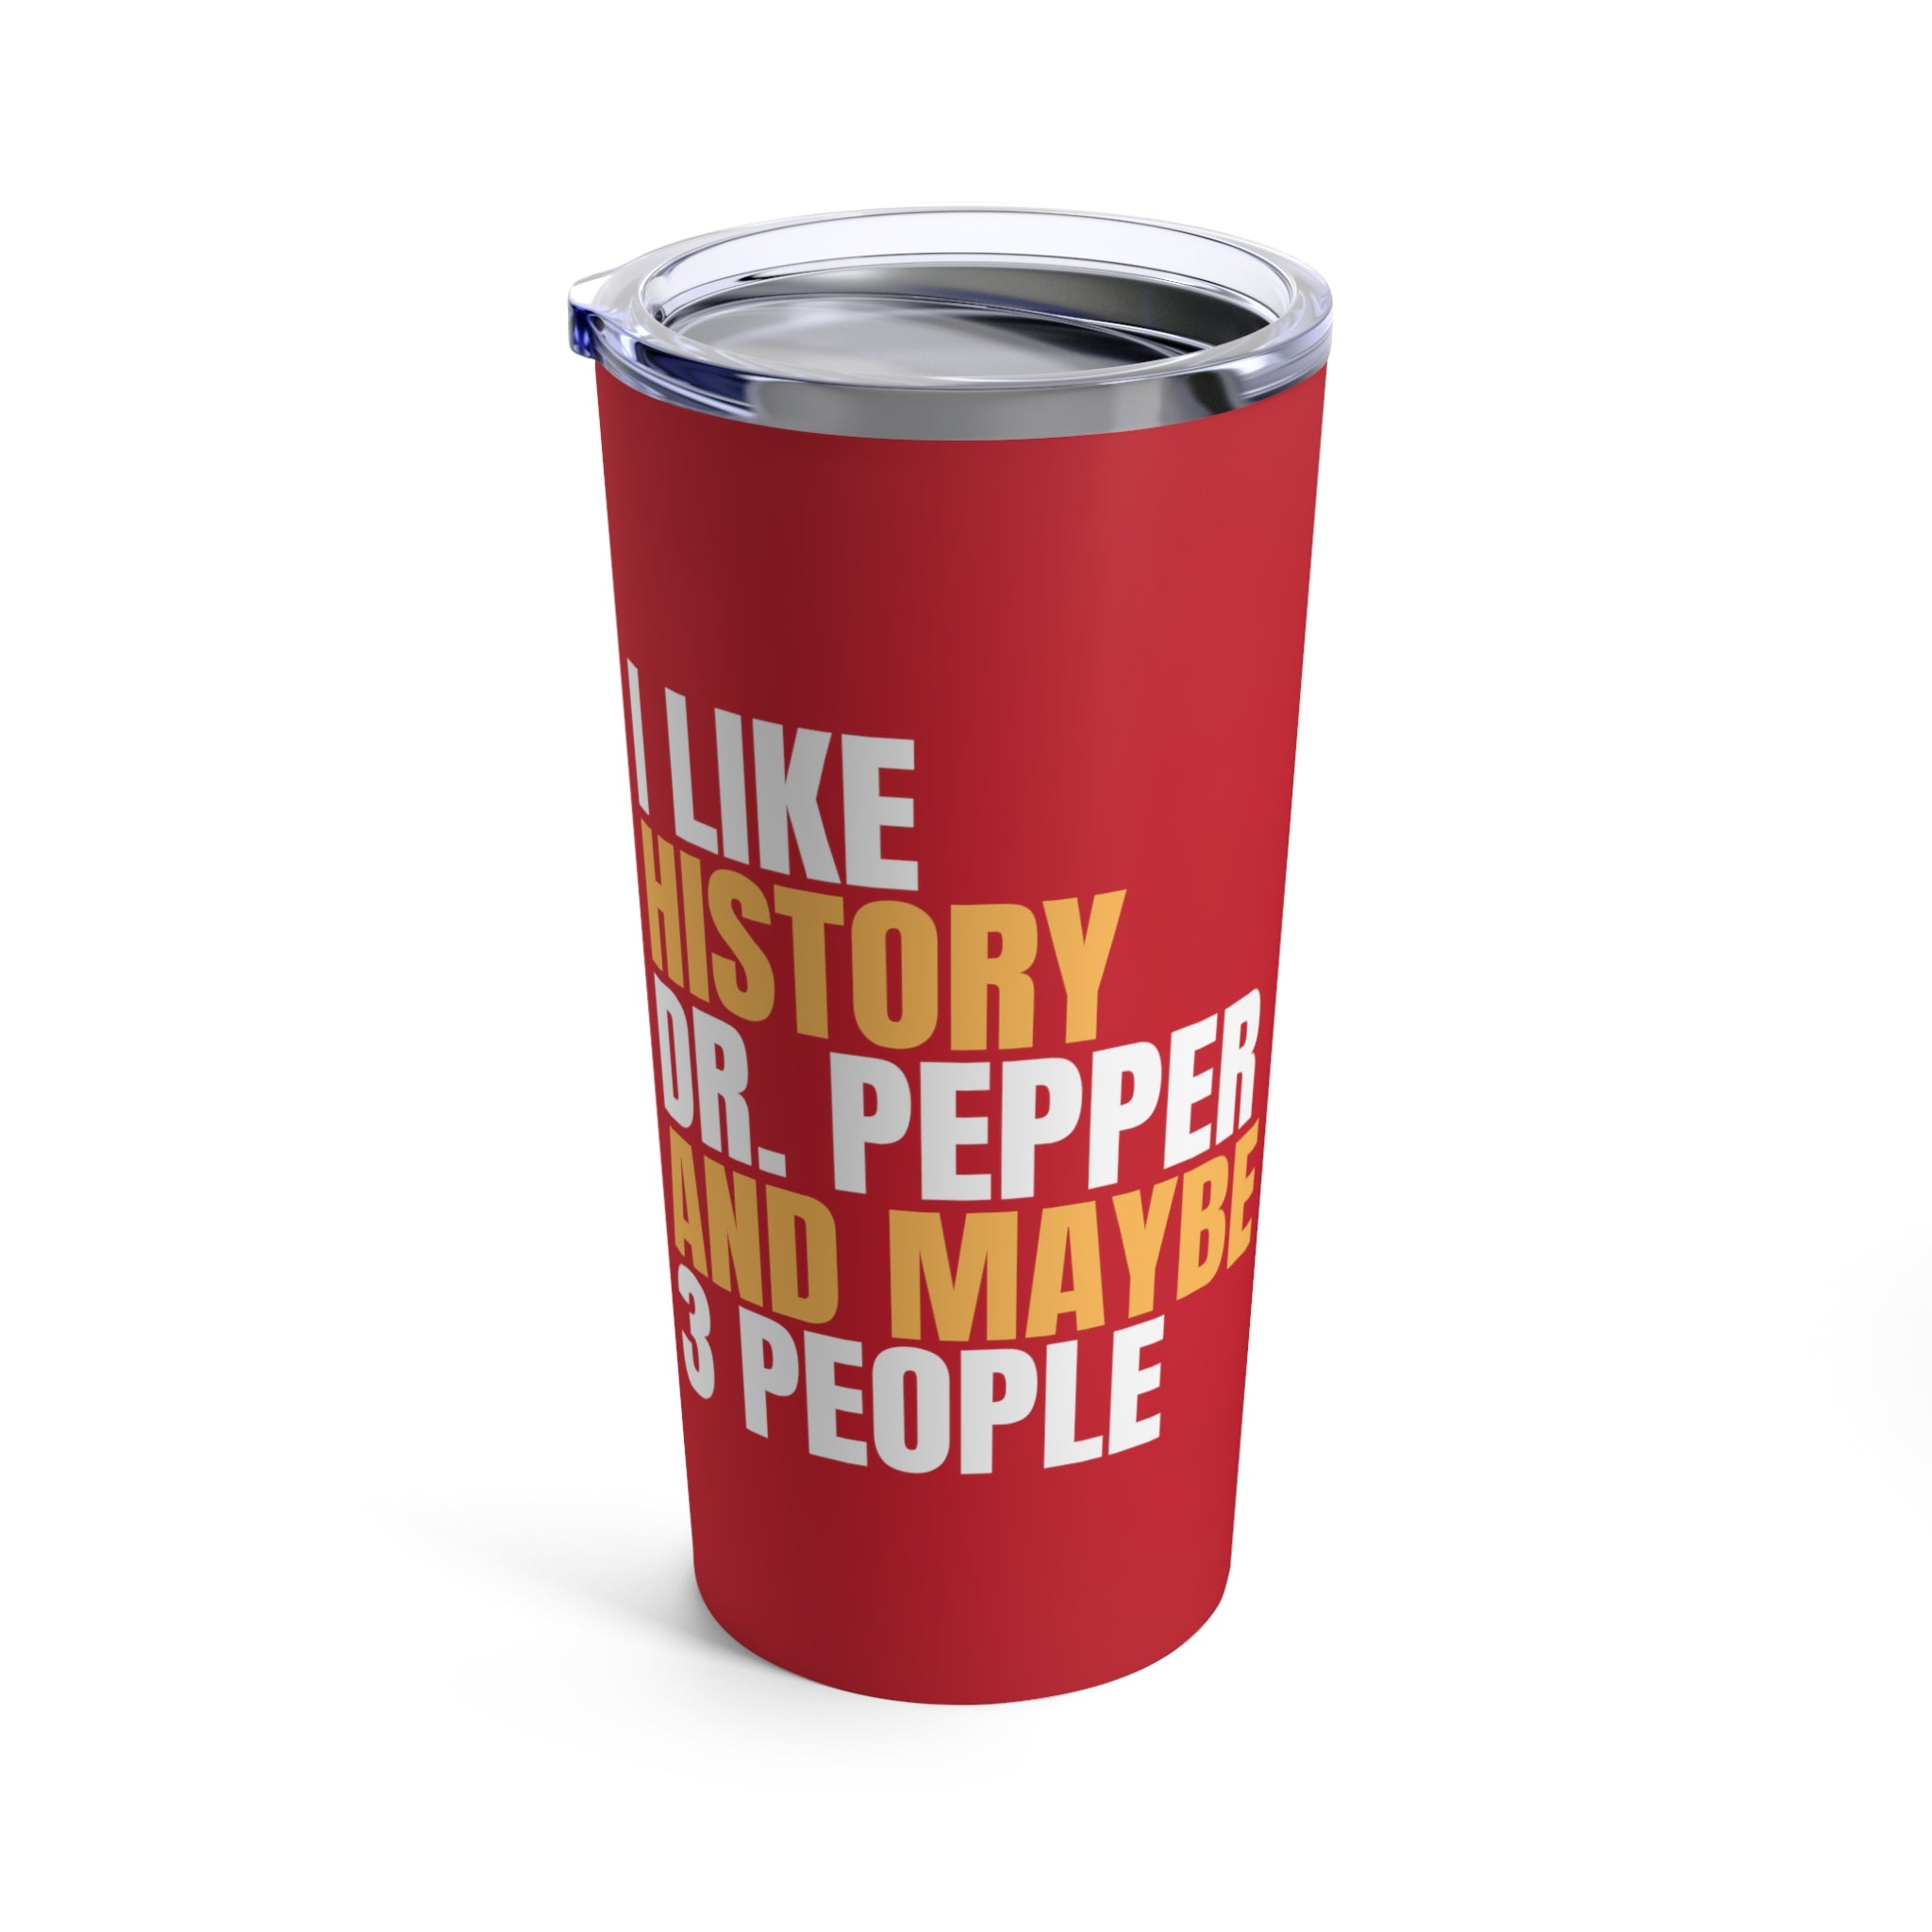 I Like History Dr Pepper and Maybe 3 People Tumbler 20oz